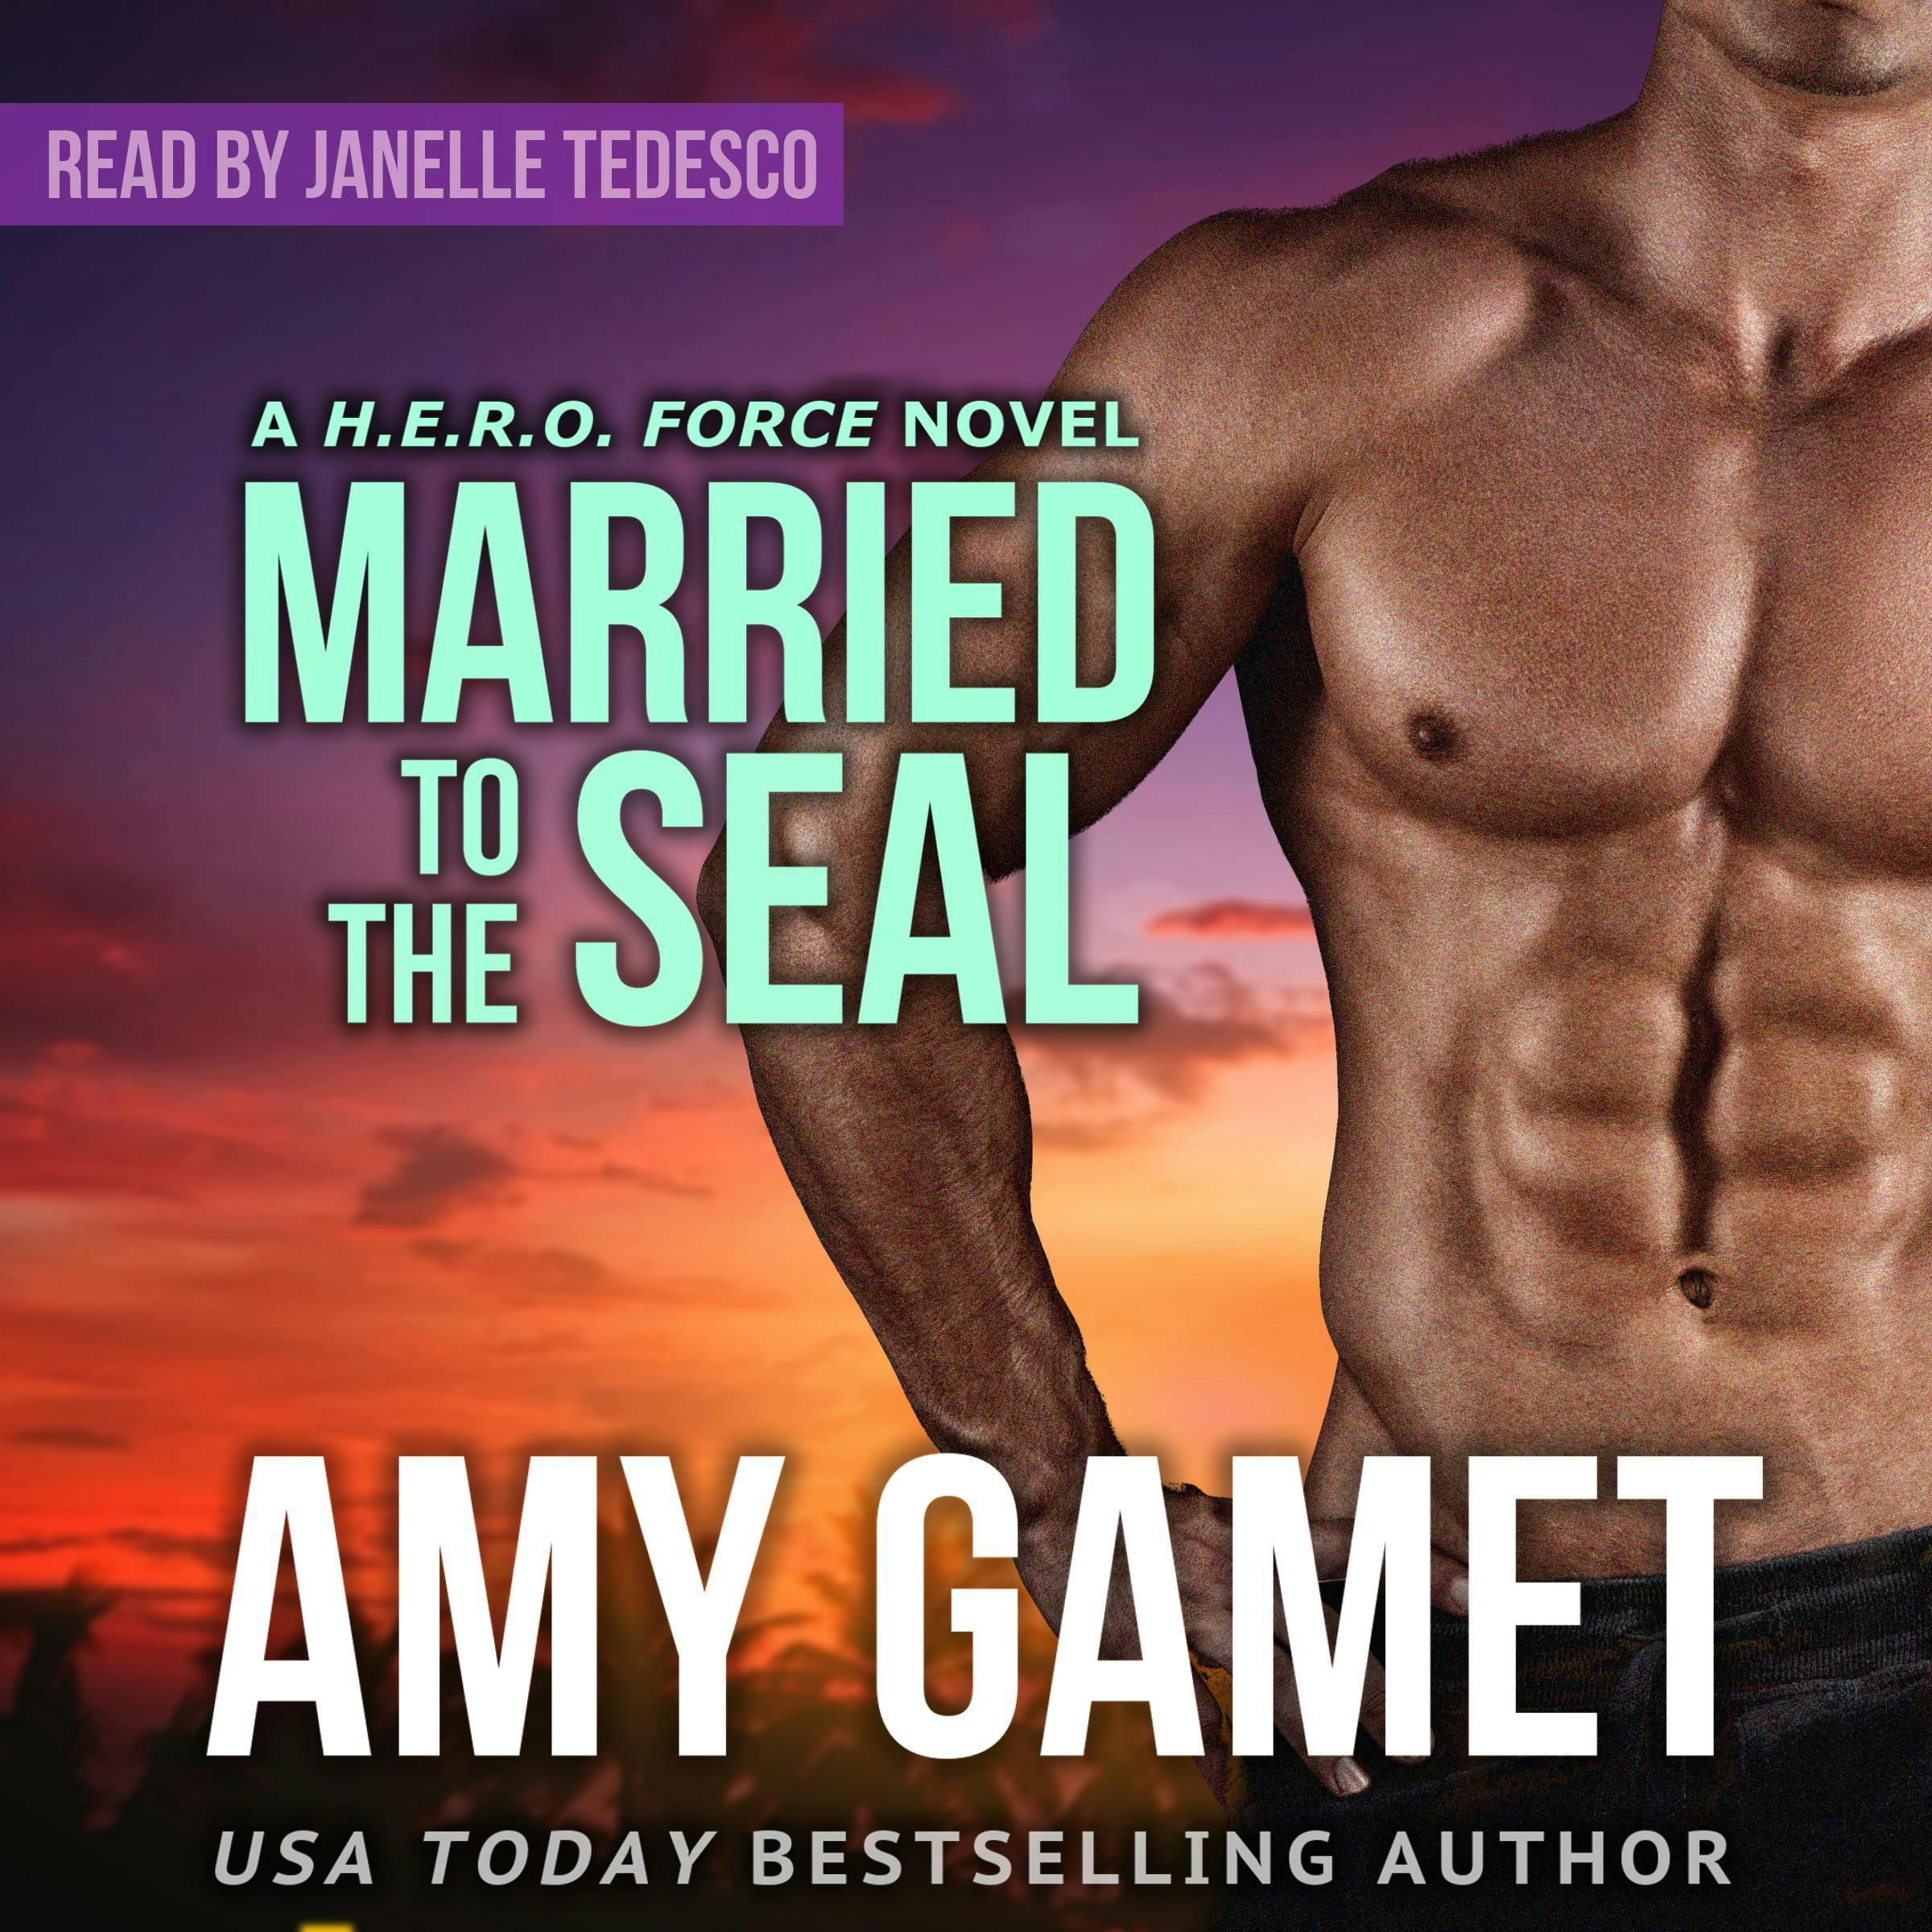 Married to the SEAL - Amy Gamet